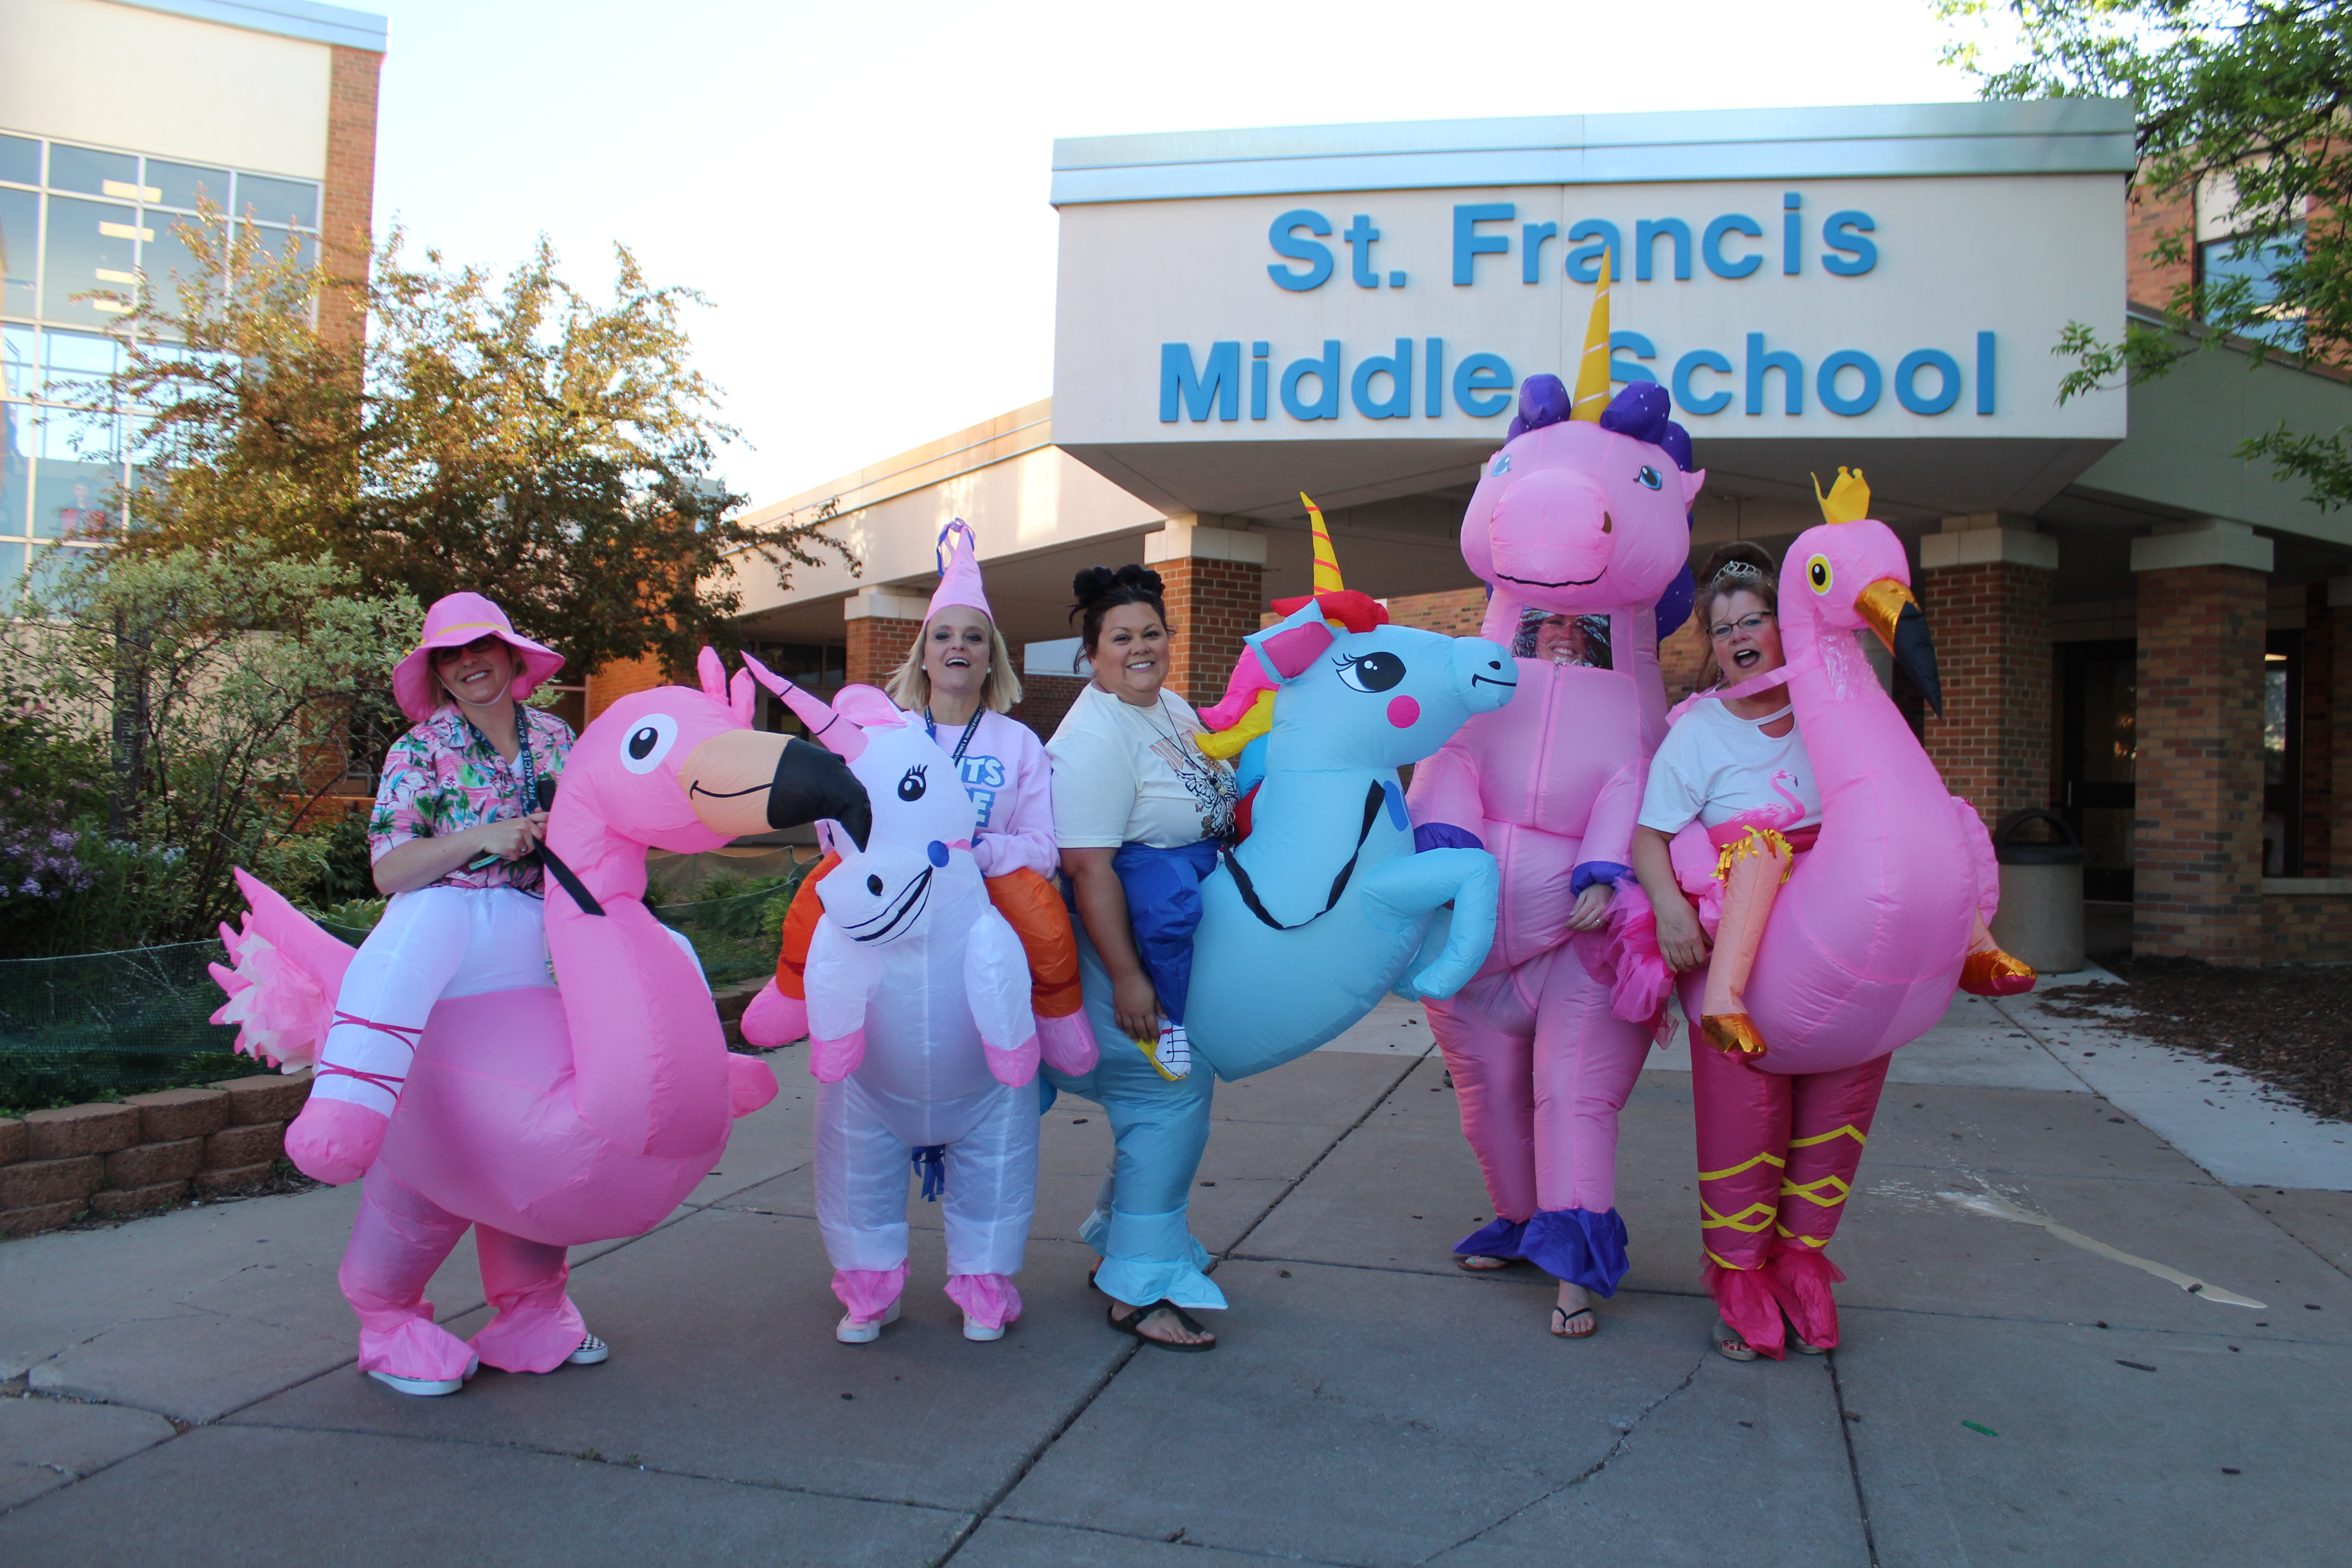 Image: Middle School Staff wearing costumes